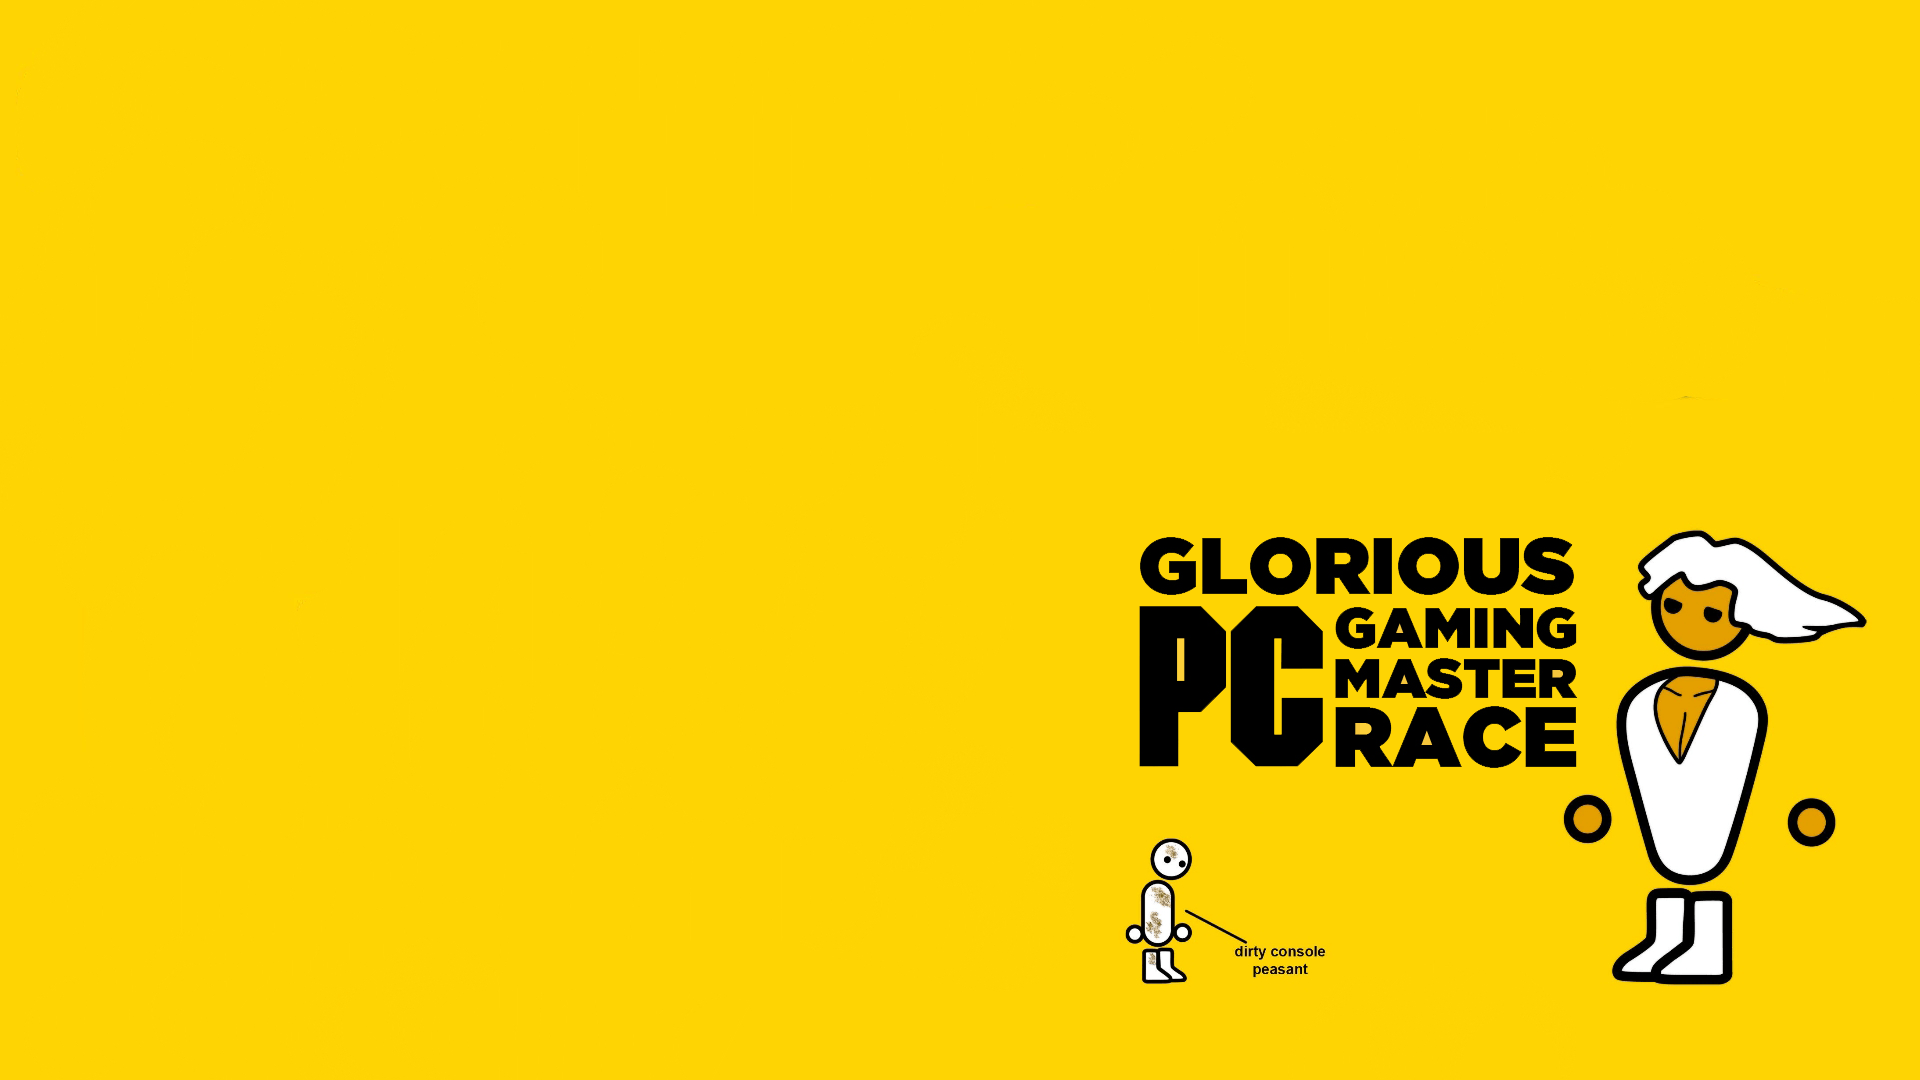 Huge 1920x1080 Gaming Wallpaper Collection (credits to /u/desertrose501) :  r/pcmasterrace